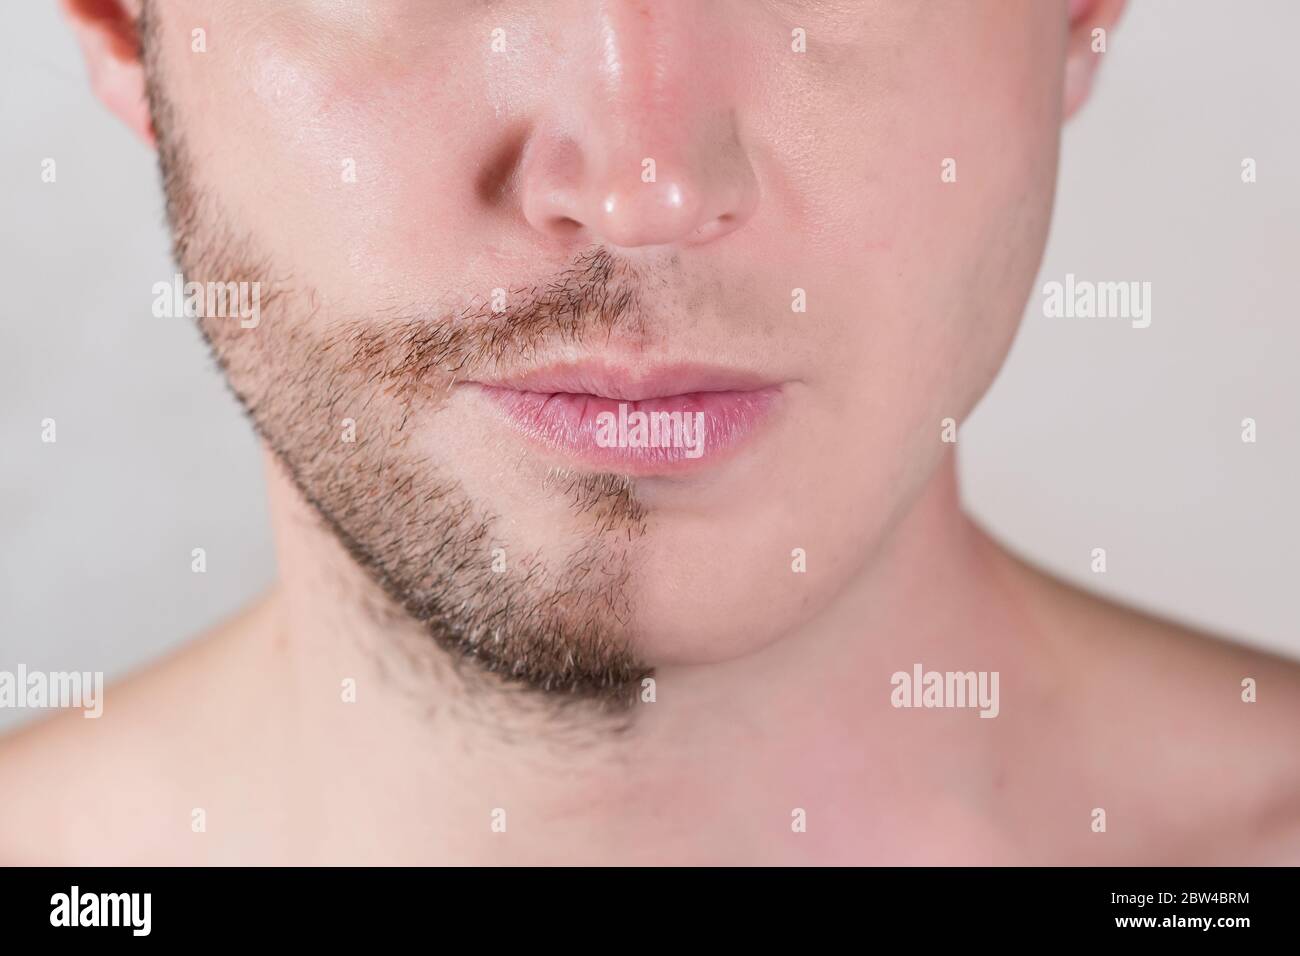 the lower half of the man s face is only half shaved Stock Photo